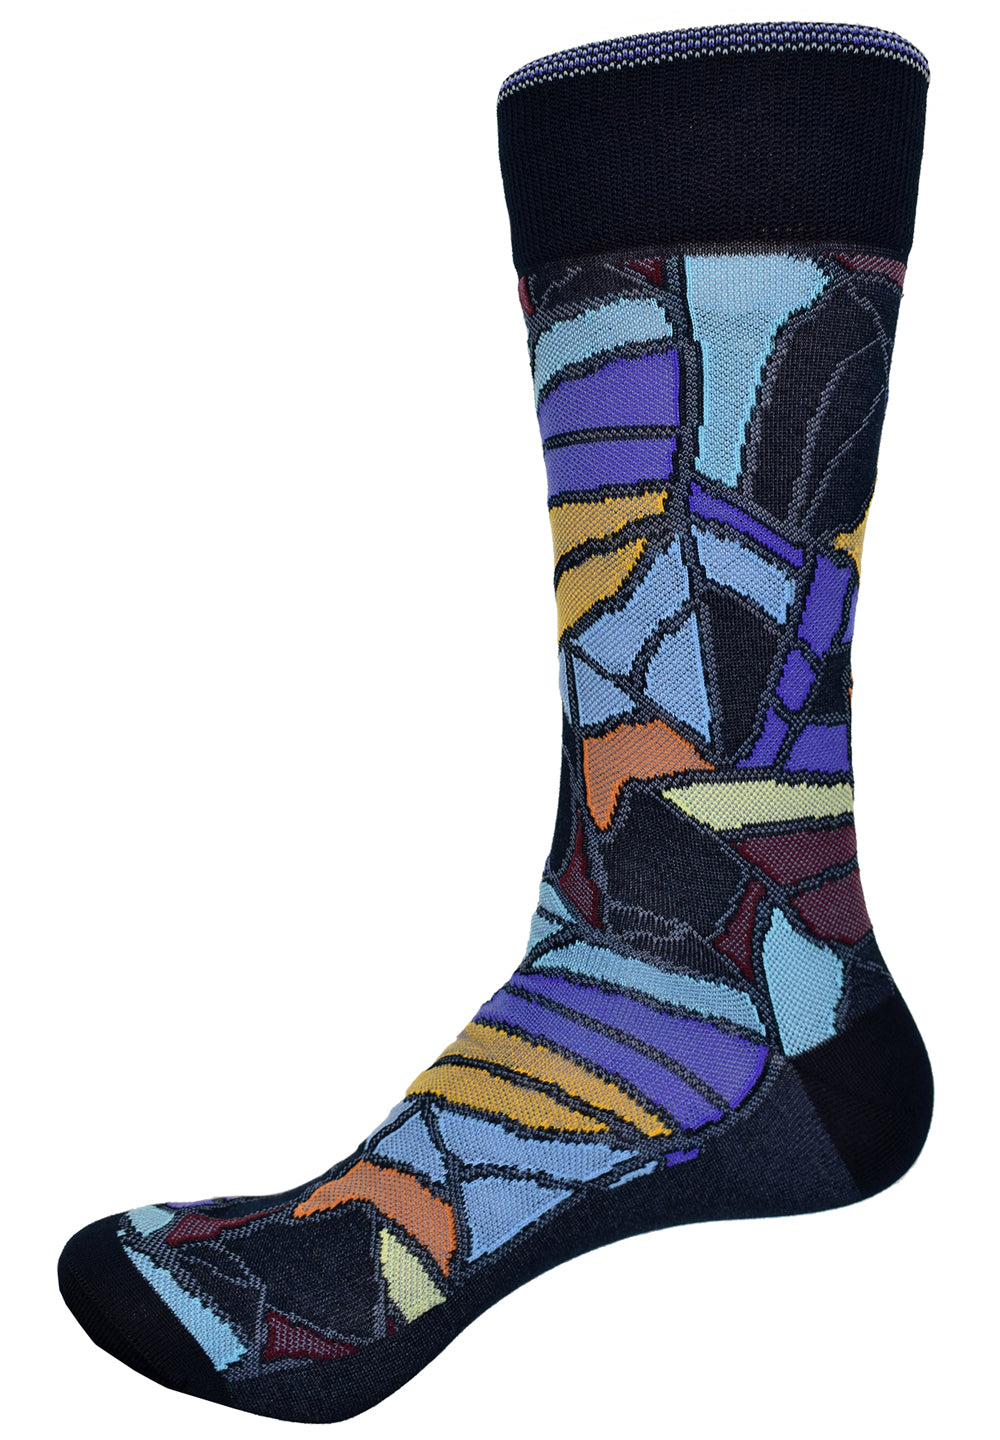 Set your image apart and make a statement with these fantastic socks.  Fine mercerized cotton with nylon blend for lightweight comfort.  Stained Glass Mosaic Socks - Red or Navy  Truly unique fashion in rich colors. Soft mercerized cotton with nylon blend for comfort. One size, fits 9-12.